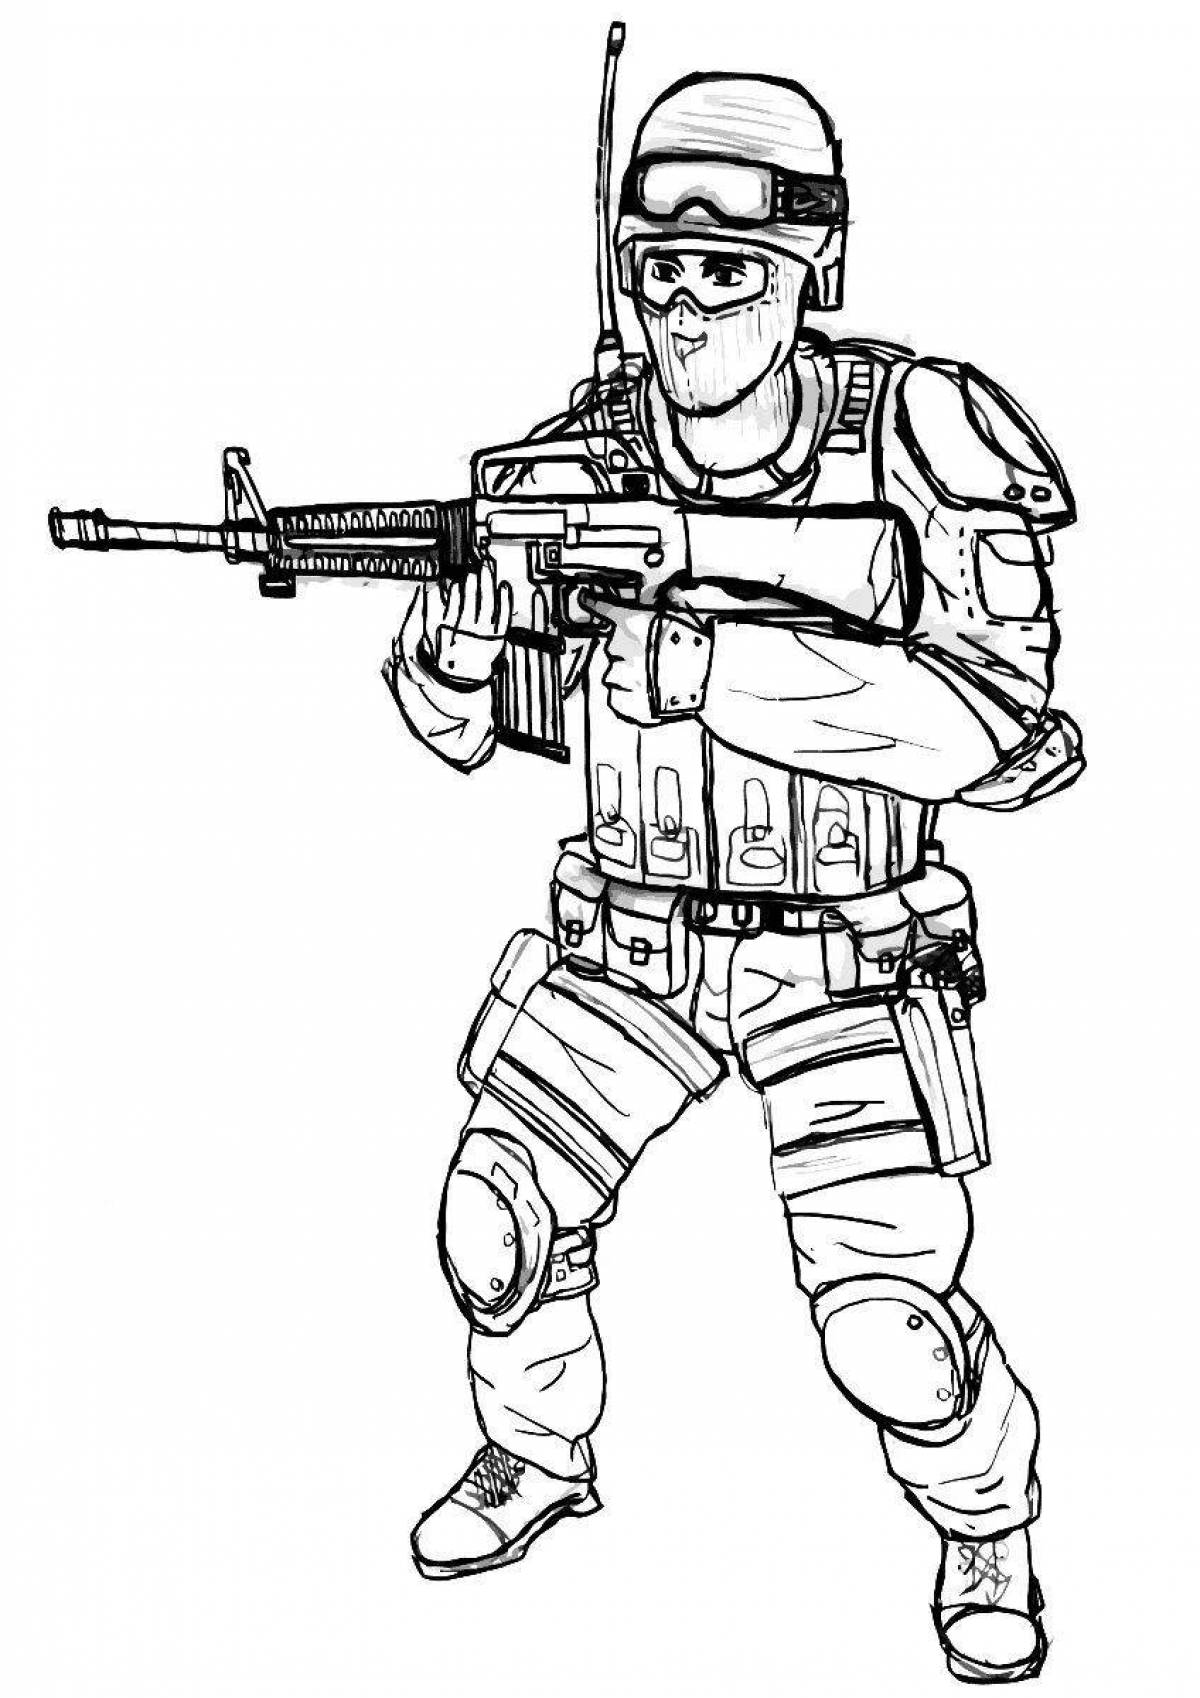 Playful cs go coloring page